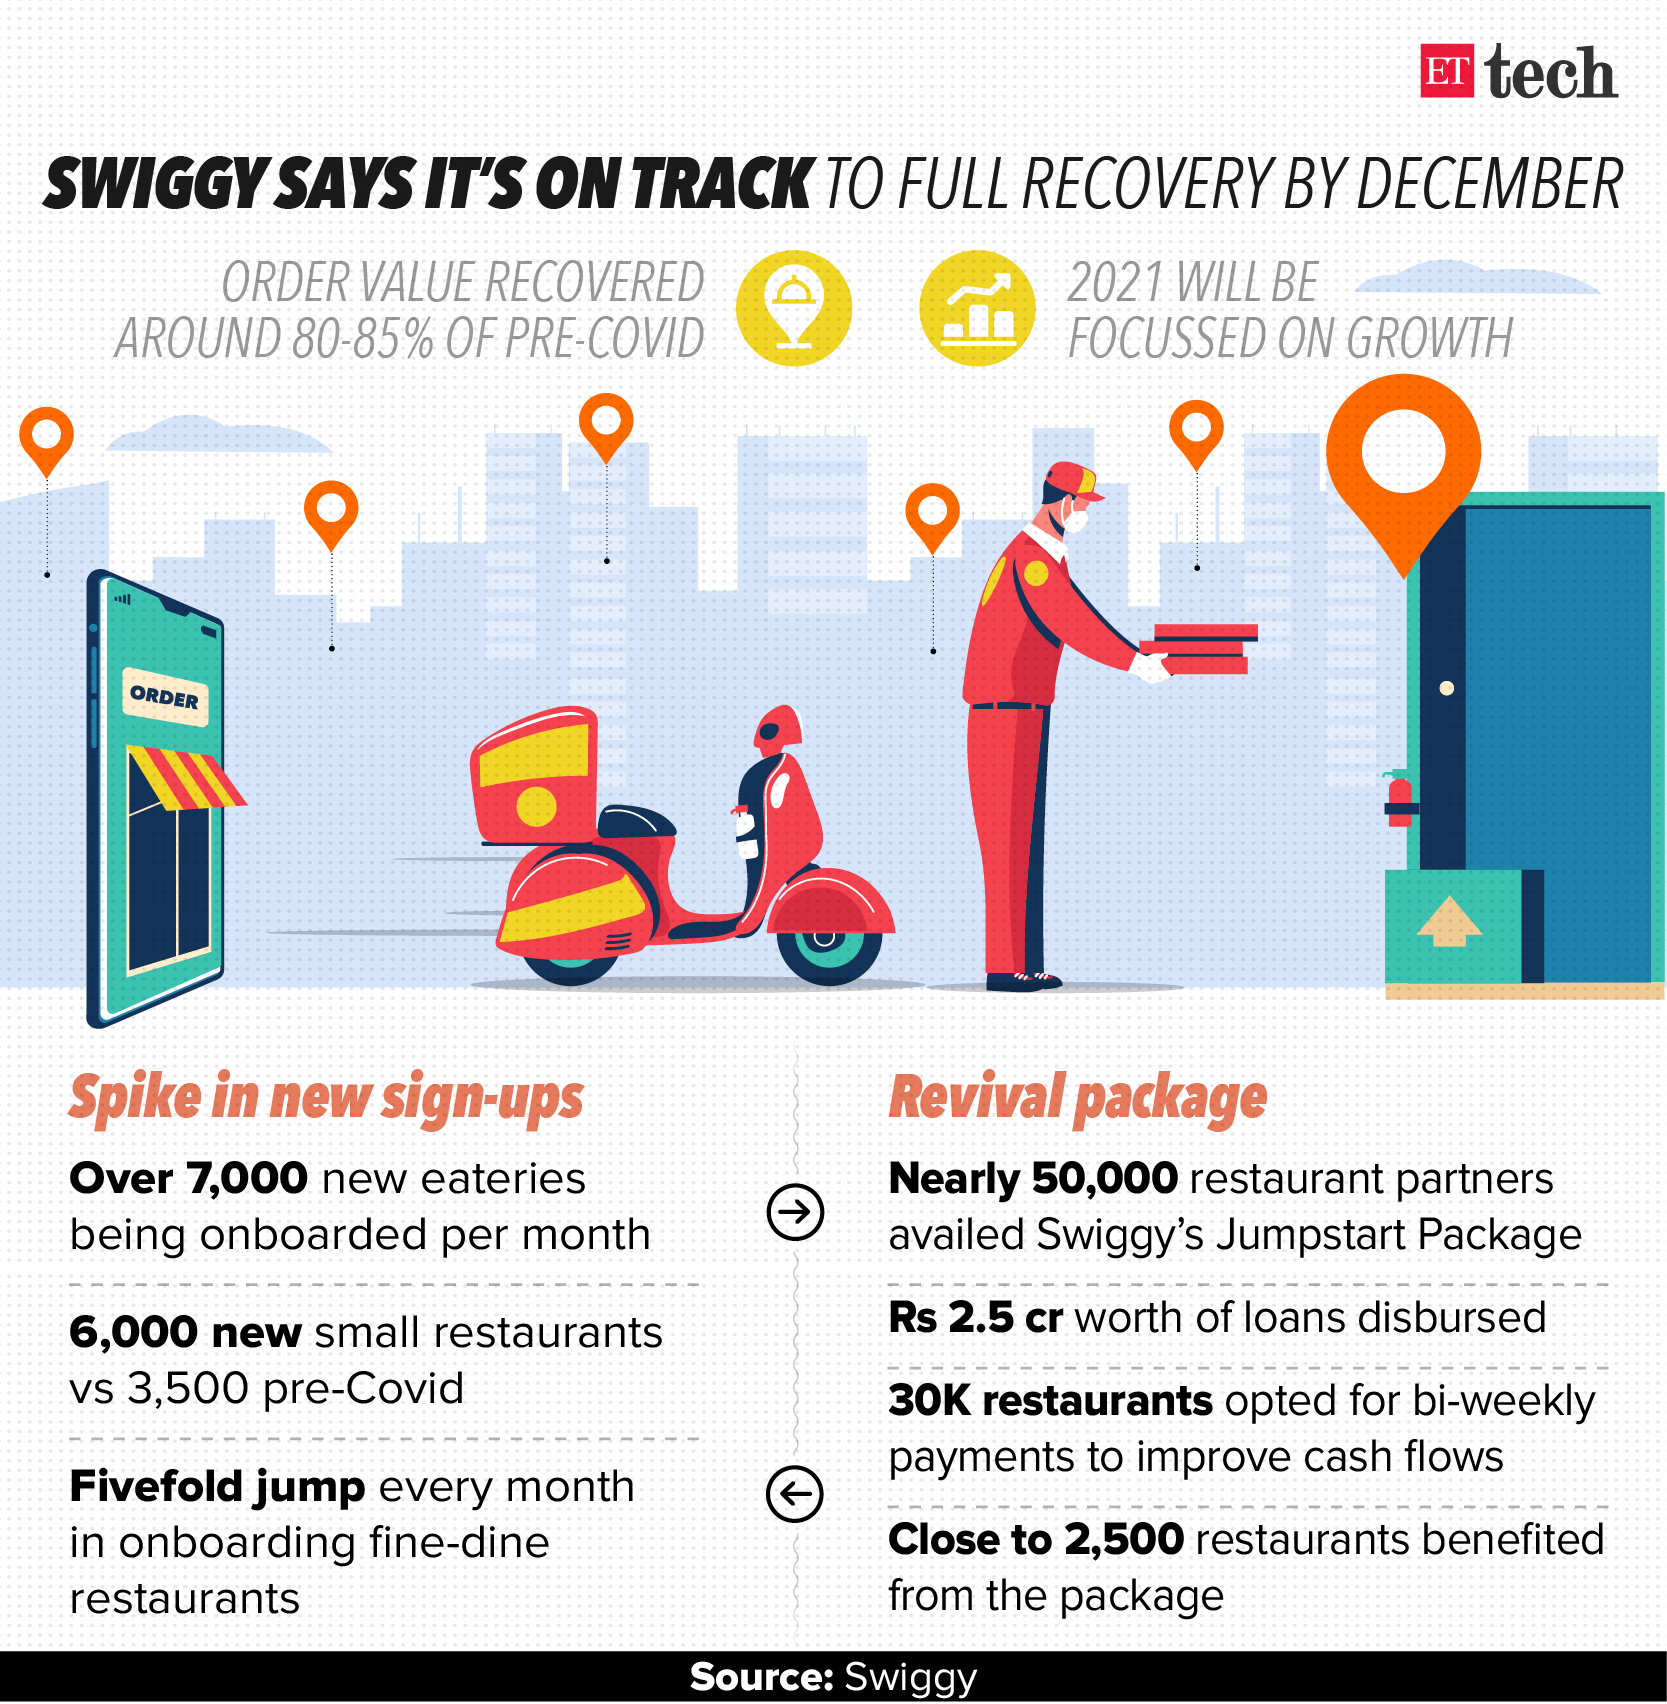 Swiggy expects food orders to return to prepandemic levels by yearend